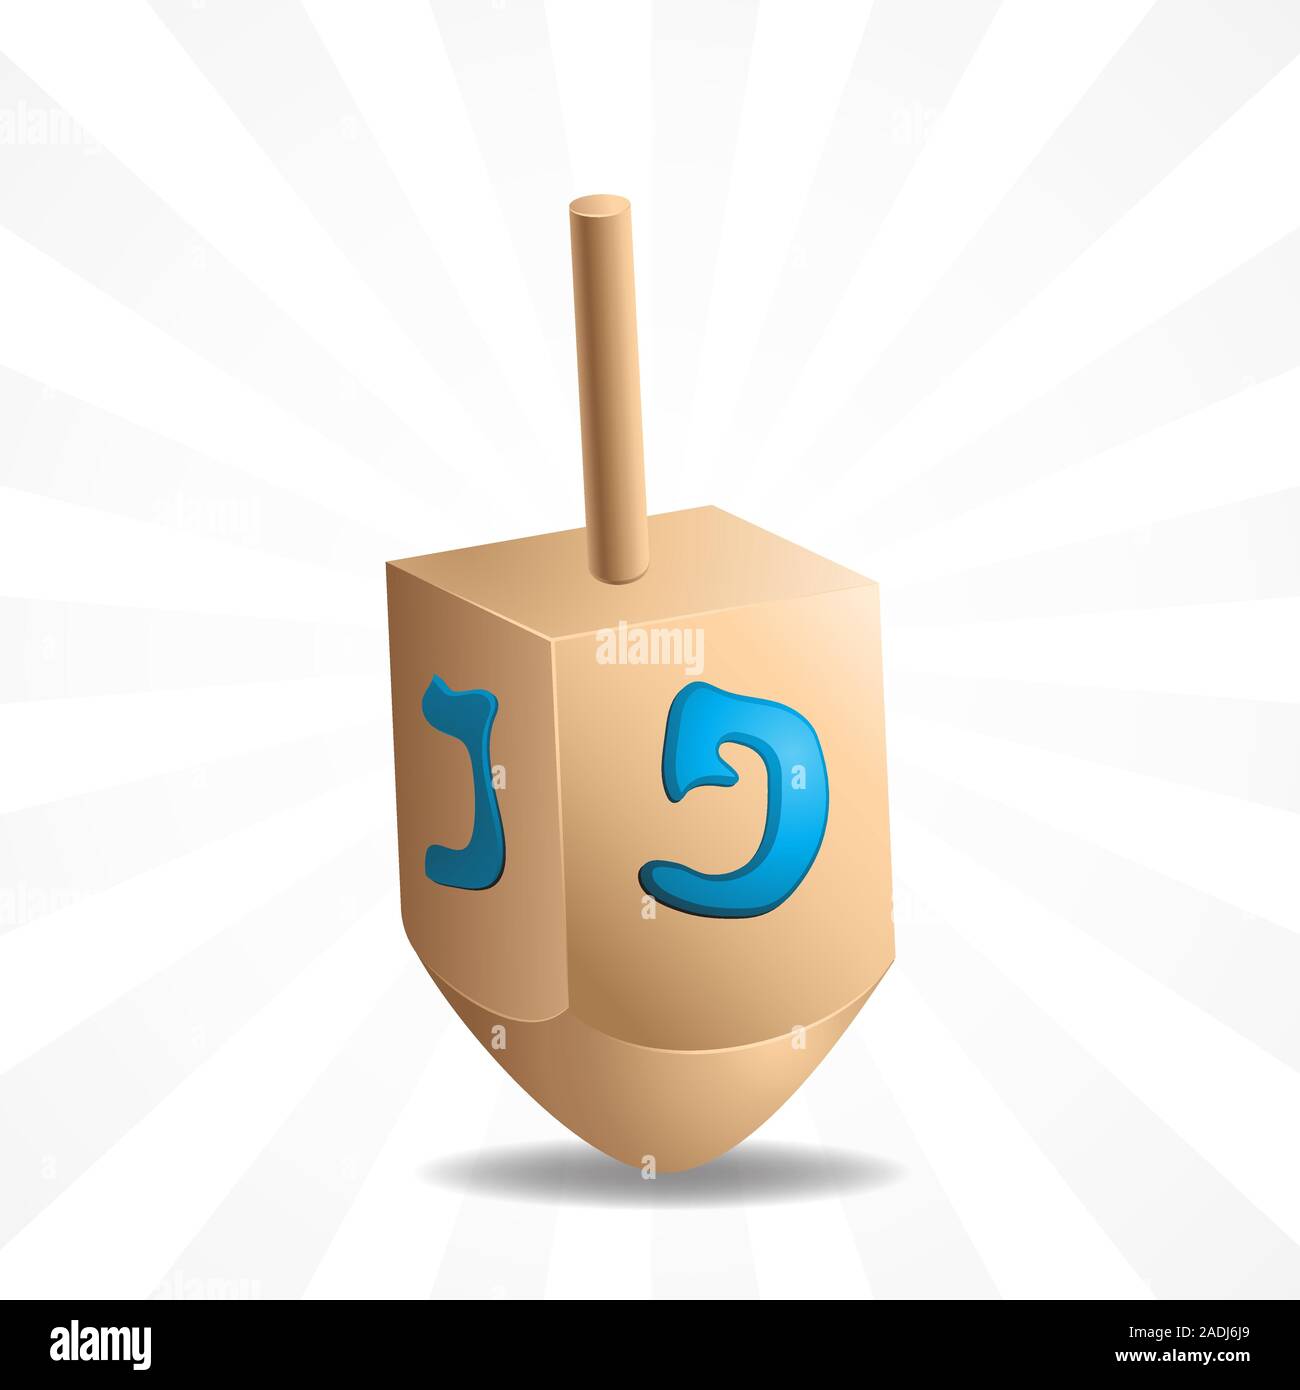 Vector illustration of wooden toy dreidel and Jewish symbol on isolated background. Stock Vector